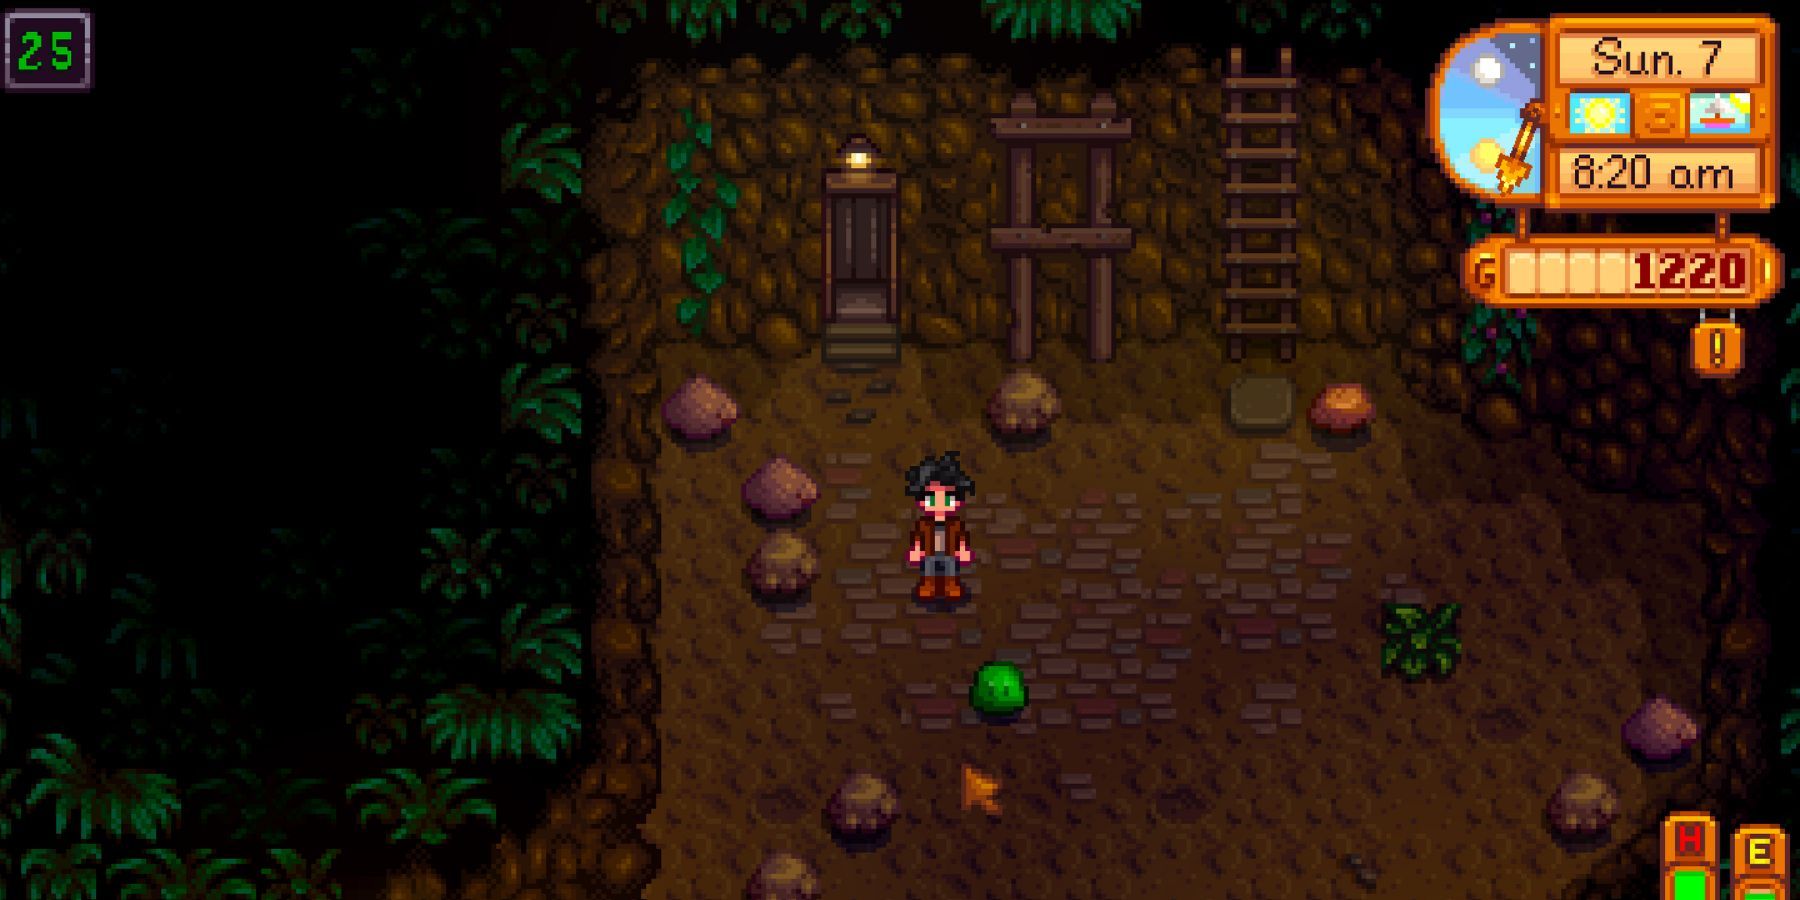 Cave in Stardew Valley